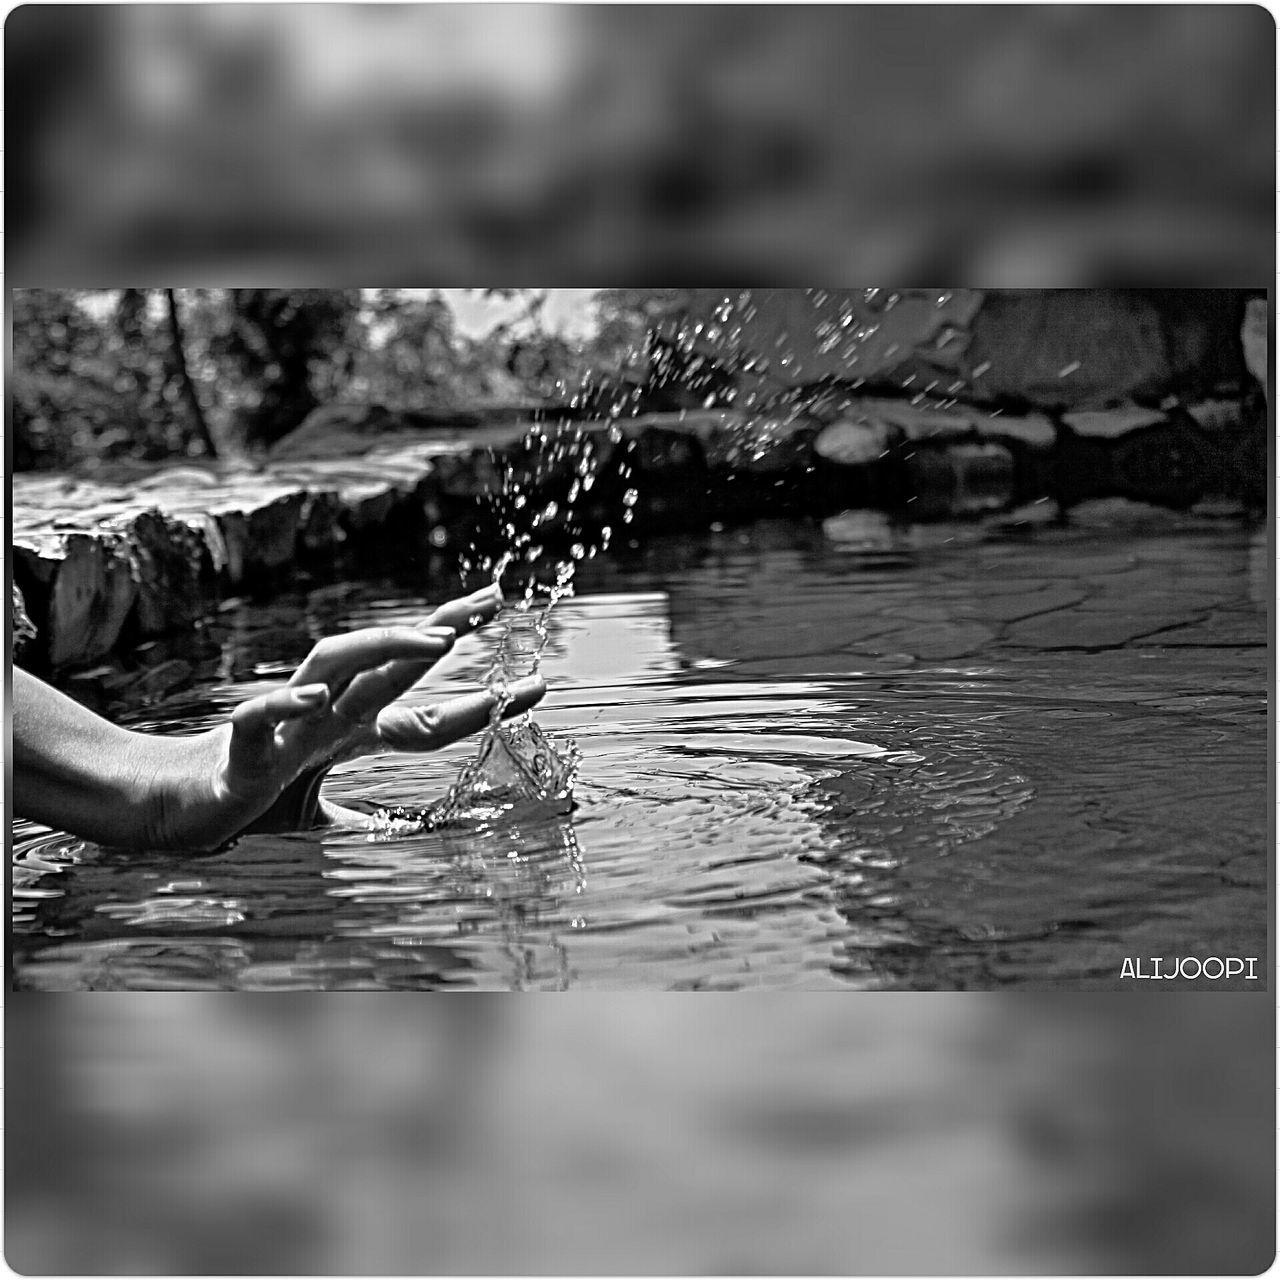 water, lifestyles, person, holding, focus on foreground, leisure activity, men, part of, selective focus, close-up, transfer print, unrecognizable person, reflection, auto post production filter, cropped, outdoors